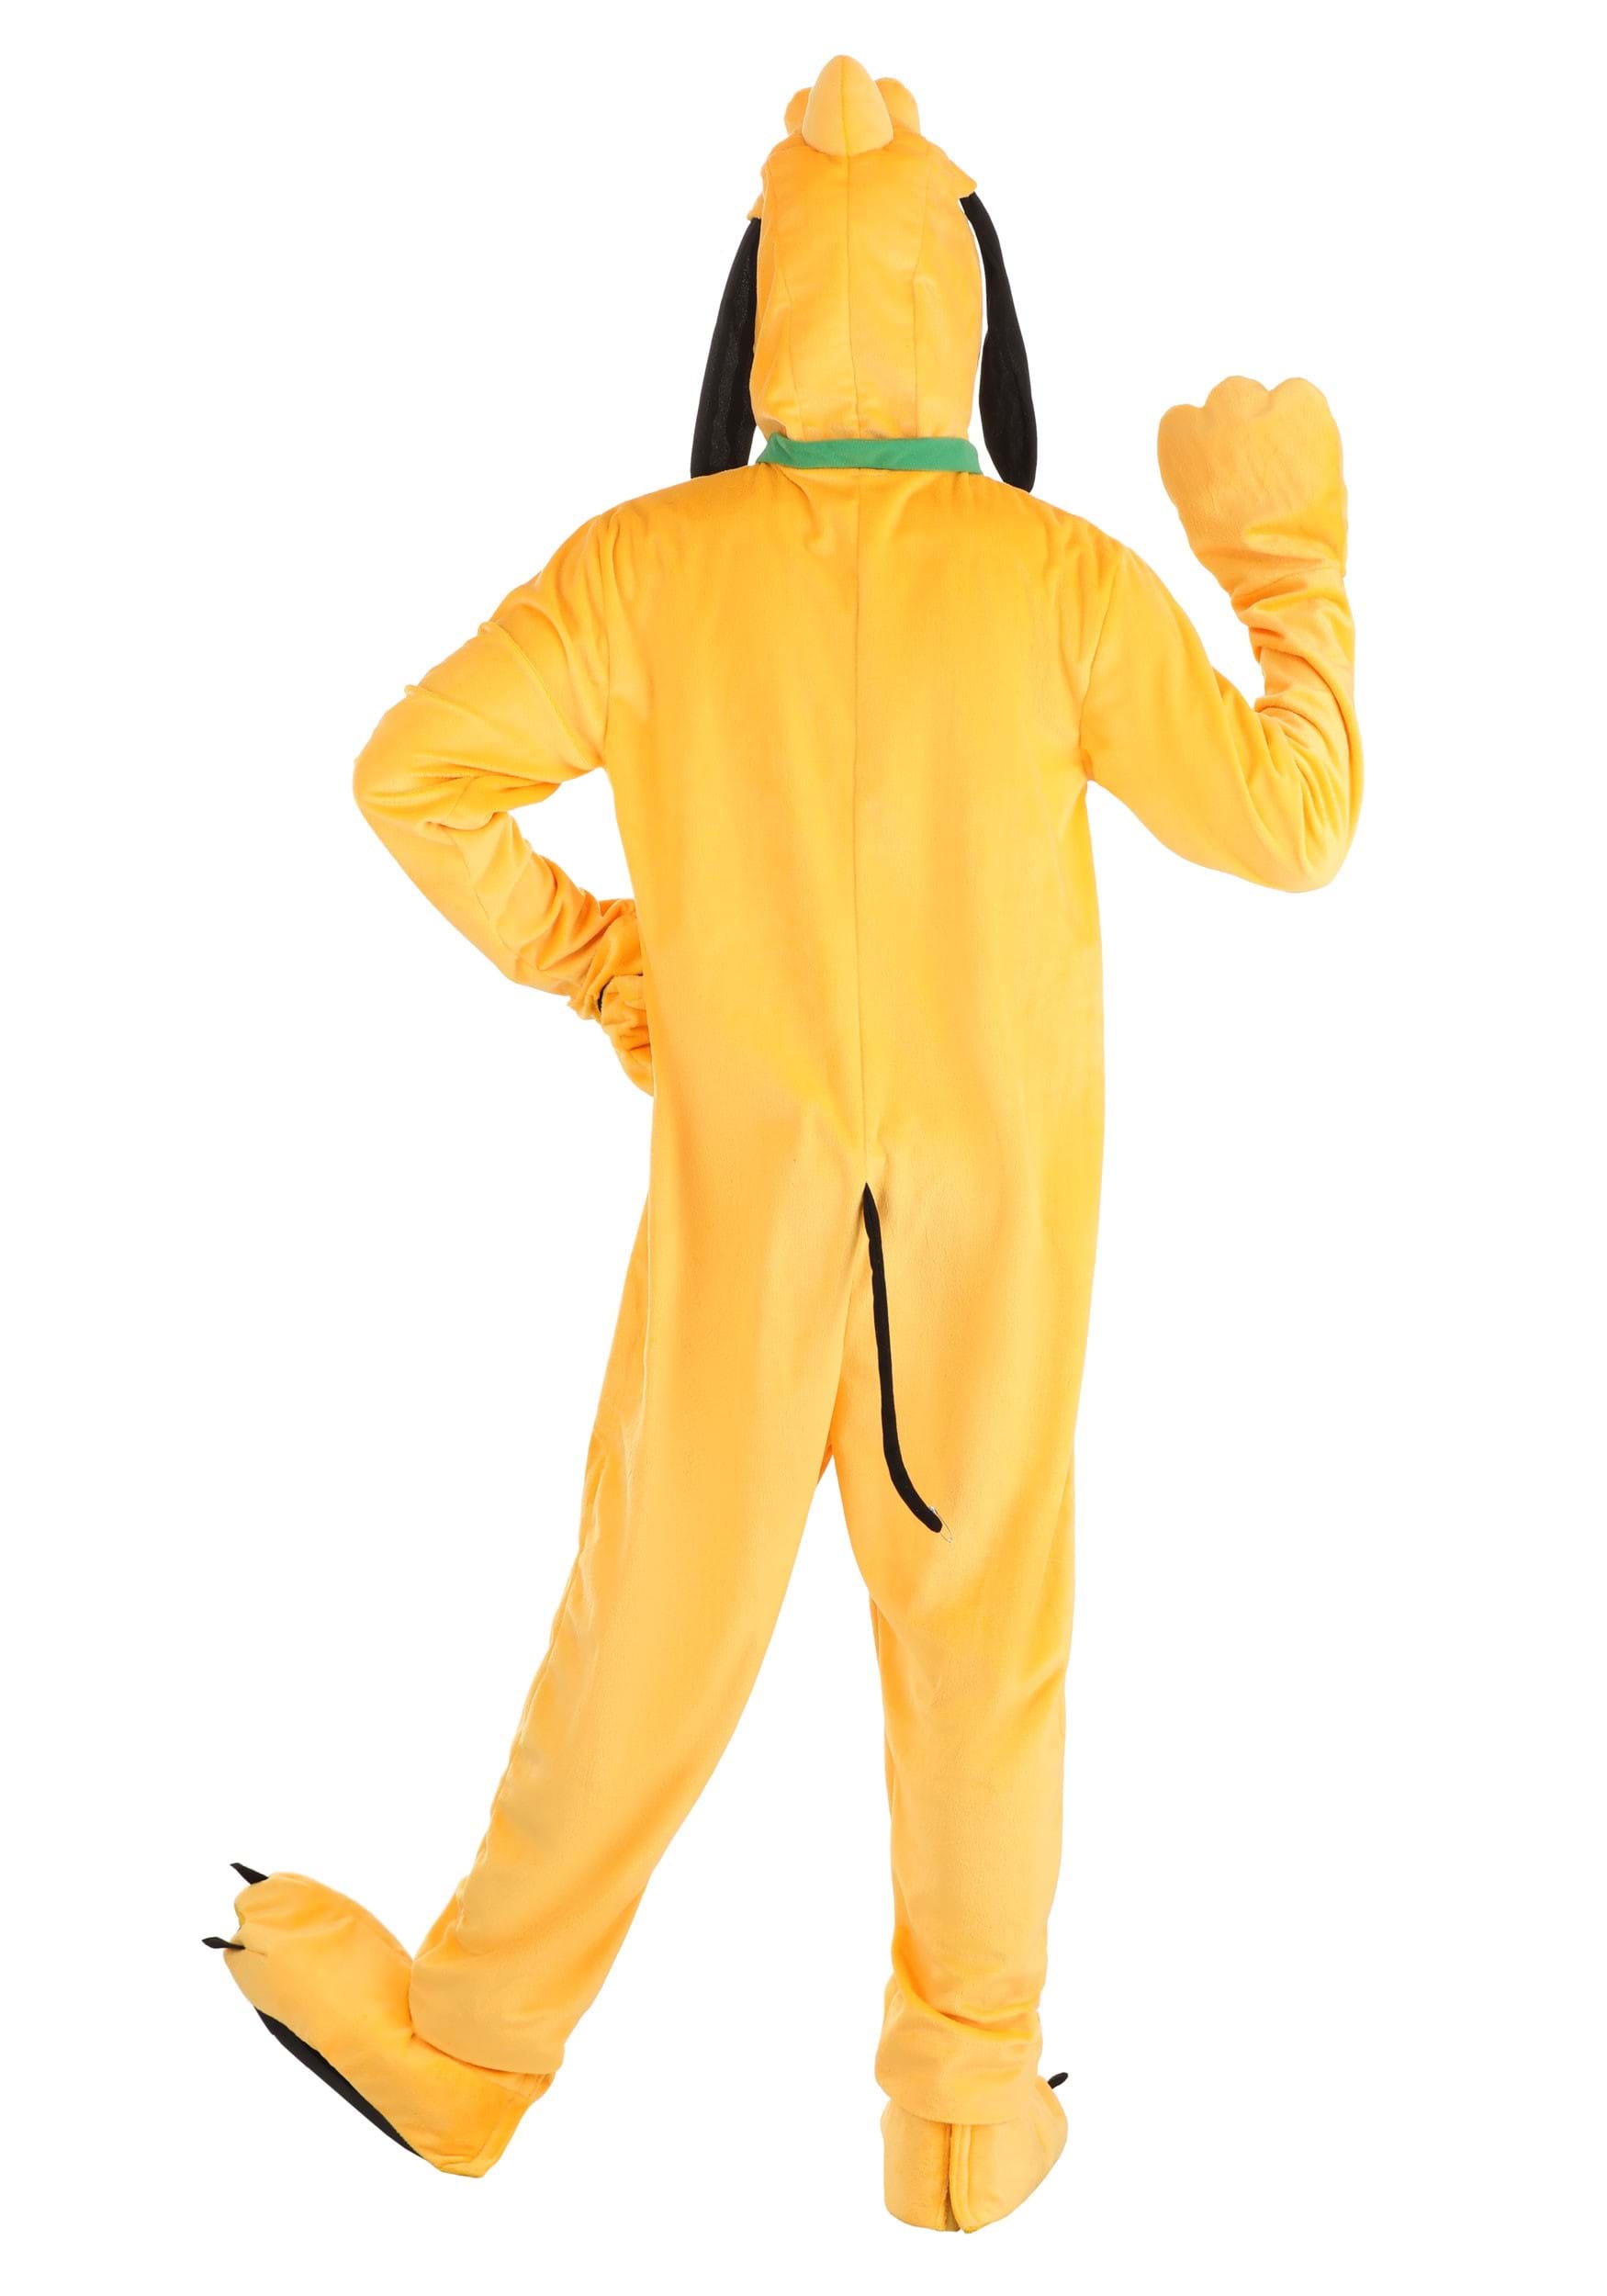 Disney Pluto Costume for Adults